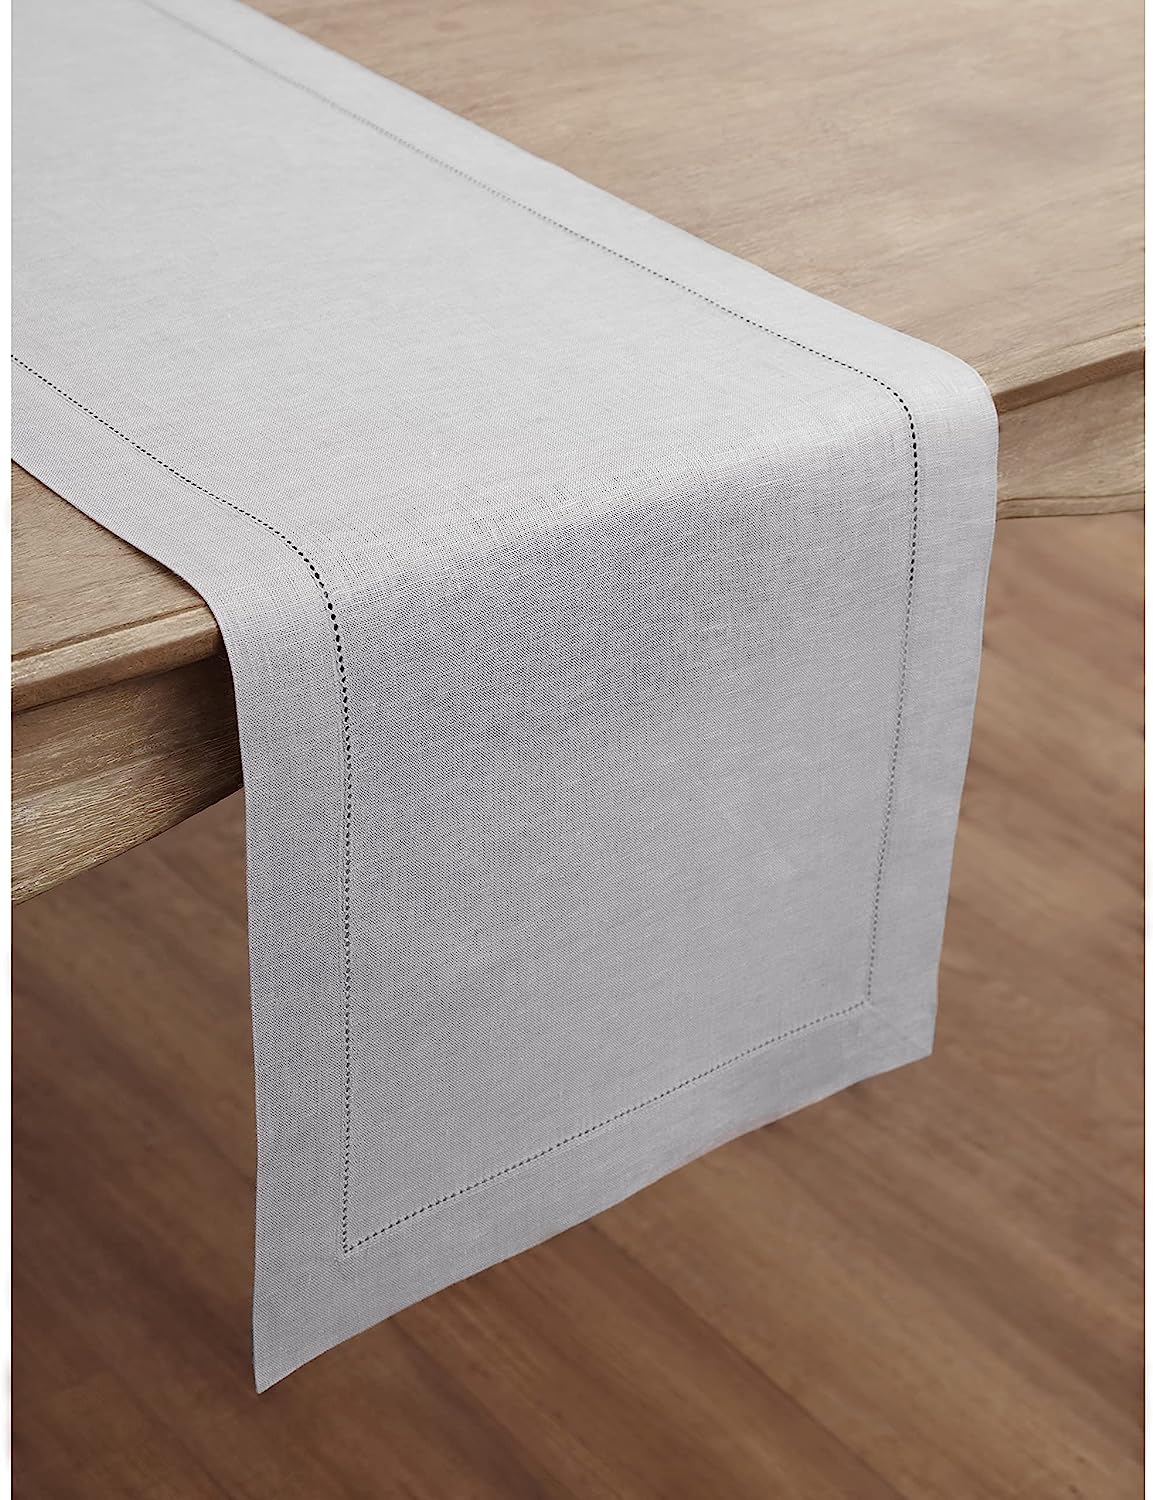 Hemstitched Table Linens (Soft Grey Color)